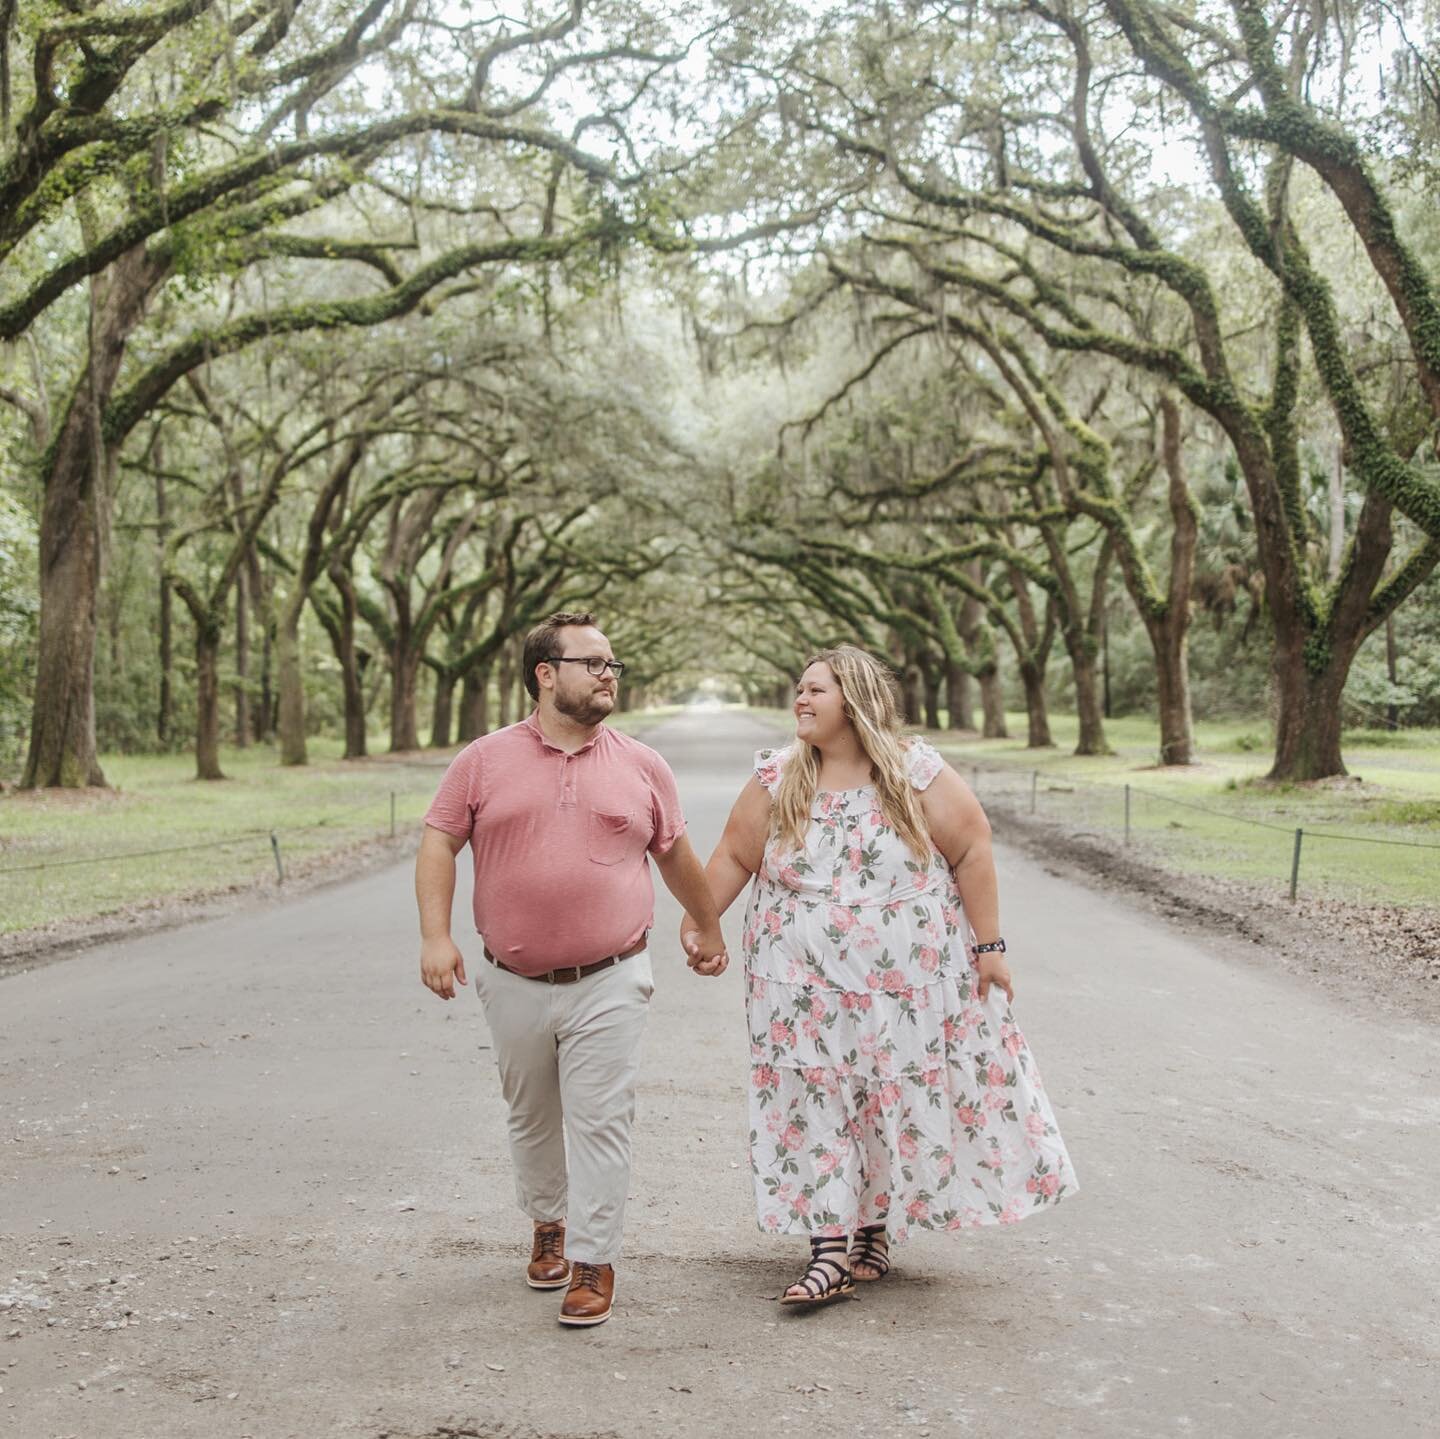 Emily &amp; Jackson✨

Say it with me guys - Savannah is BEAUTIFUL. From the willow trees to the historical architecture, it offered such a dreamy backdrop for this gorgeous couple's engagement session.

&bull;
&bull;
&bull;
&bull;

#austynseitzphotog